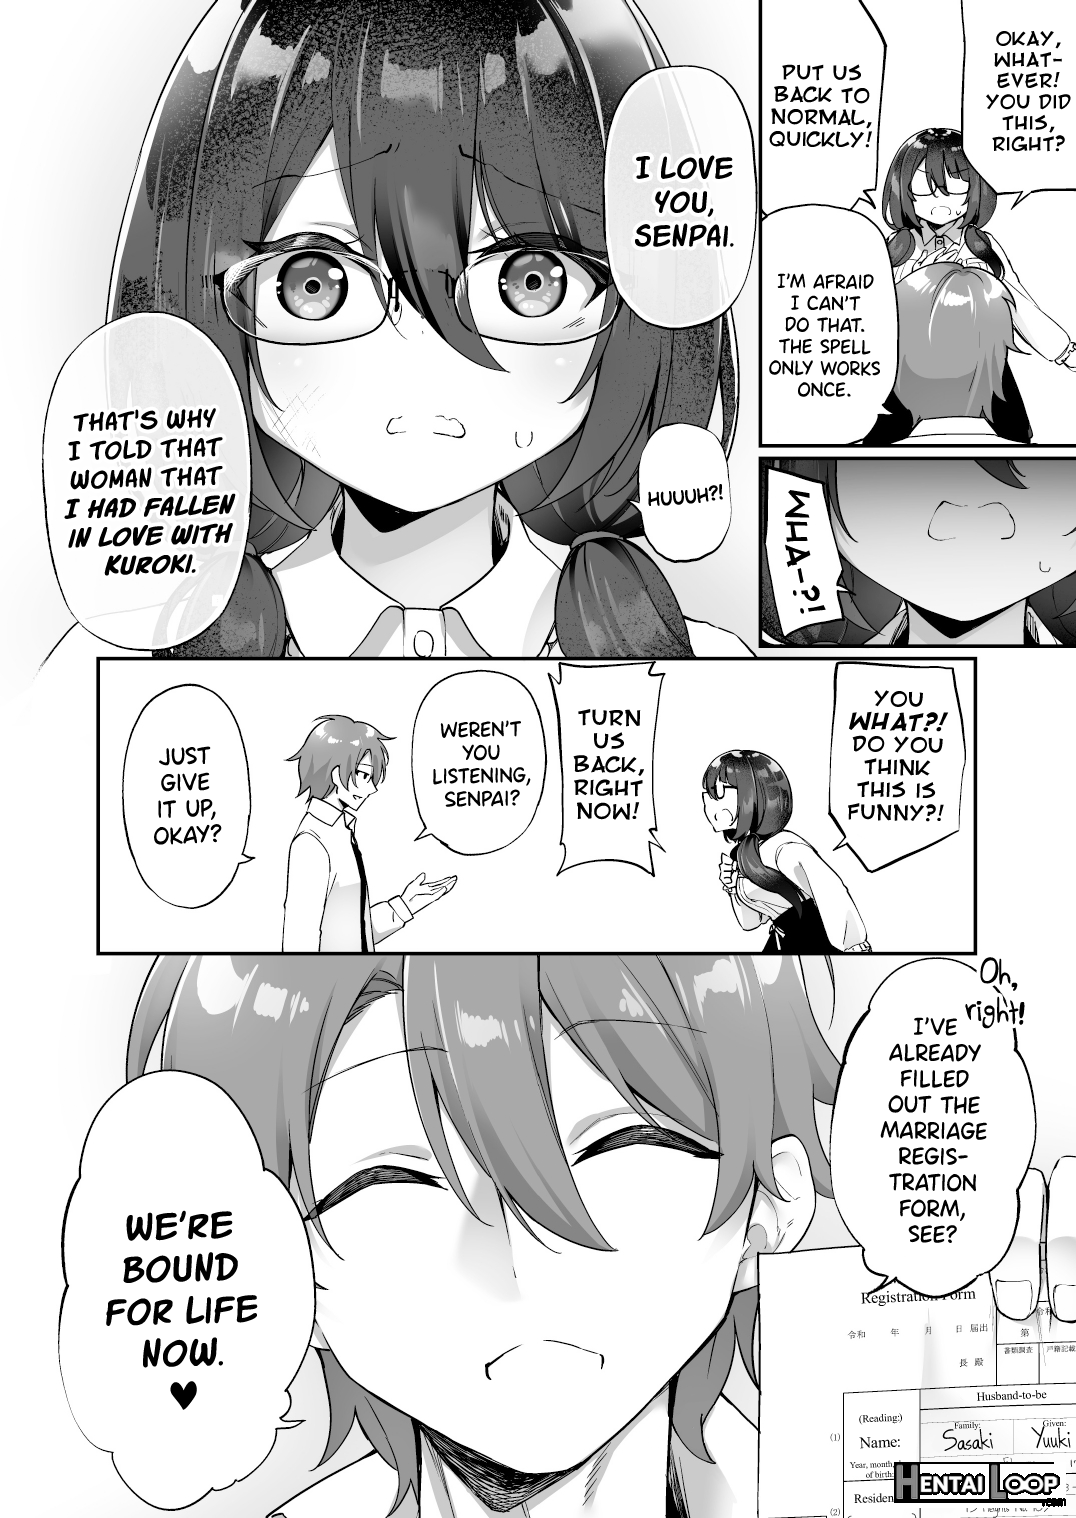 My Voluptuous Yandere Kouhai Who Gets Turned On Just By Hearing My Voice Switched Bodies With Me! page 9